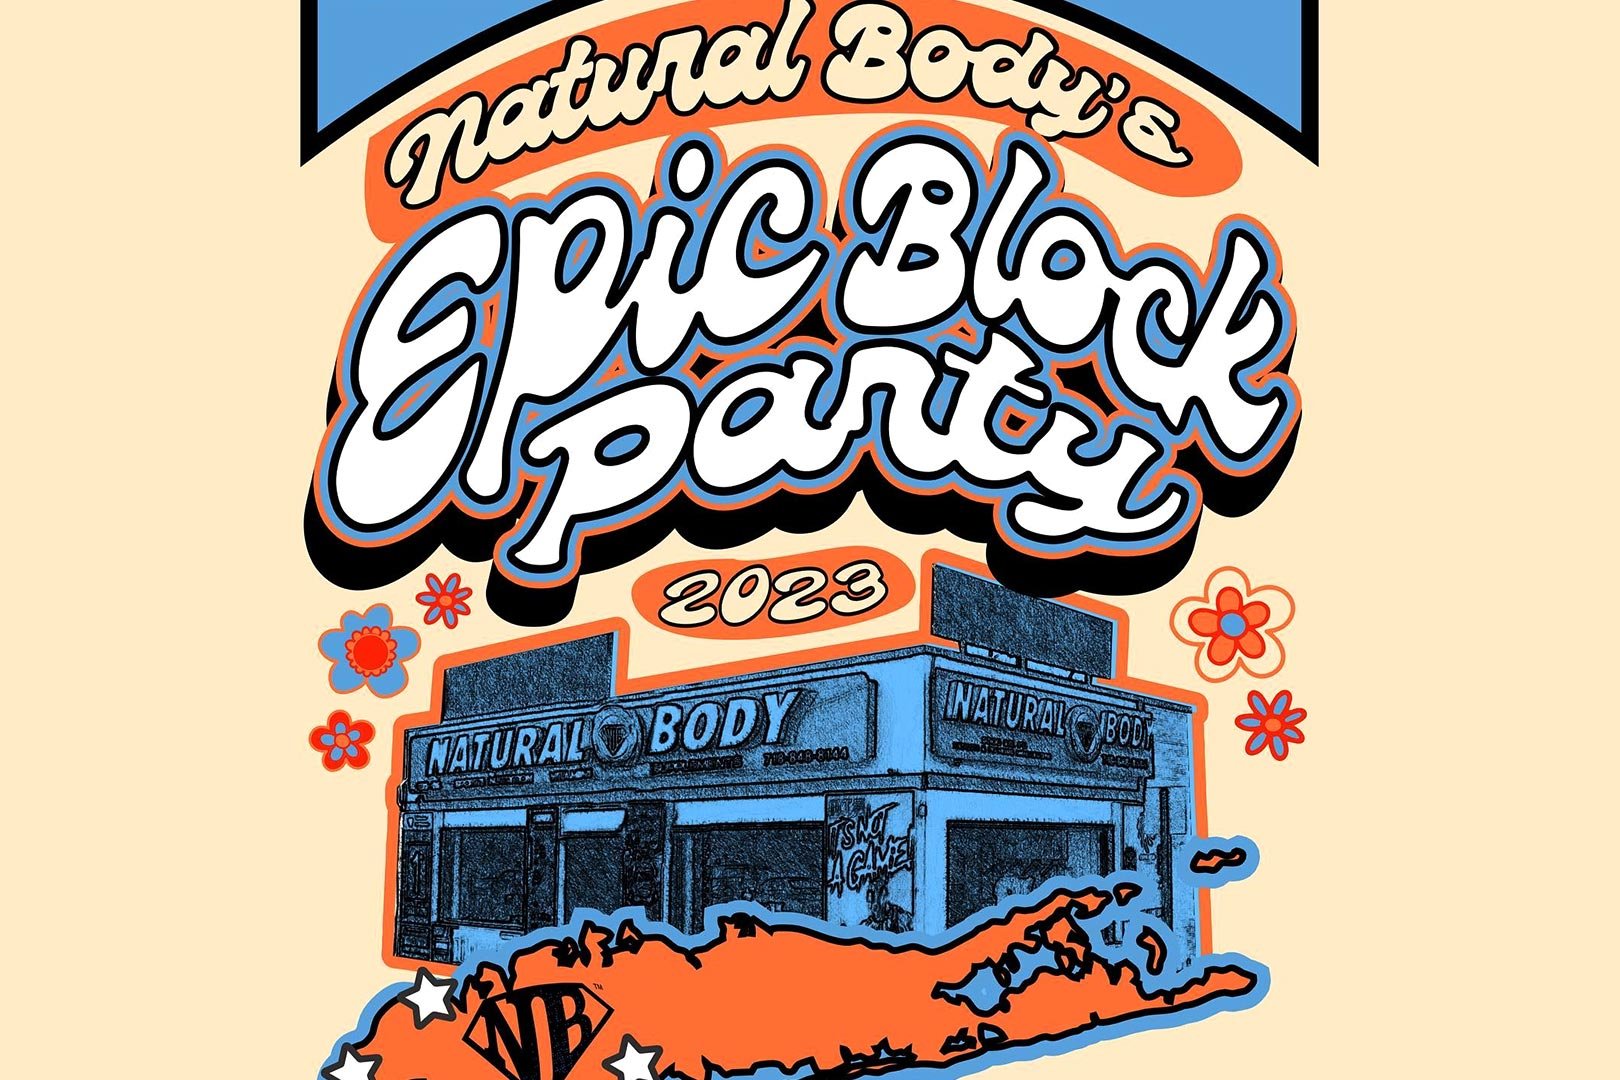 Post Epic Block Party Sale At Natural Body